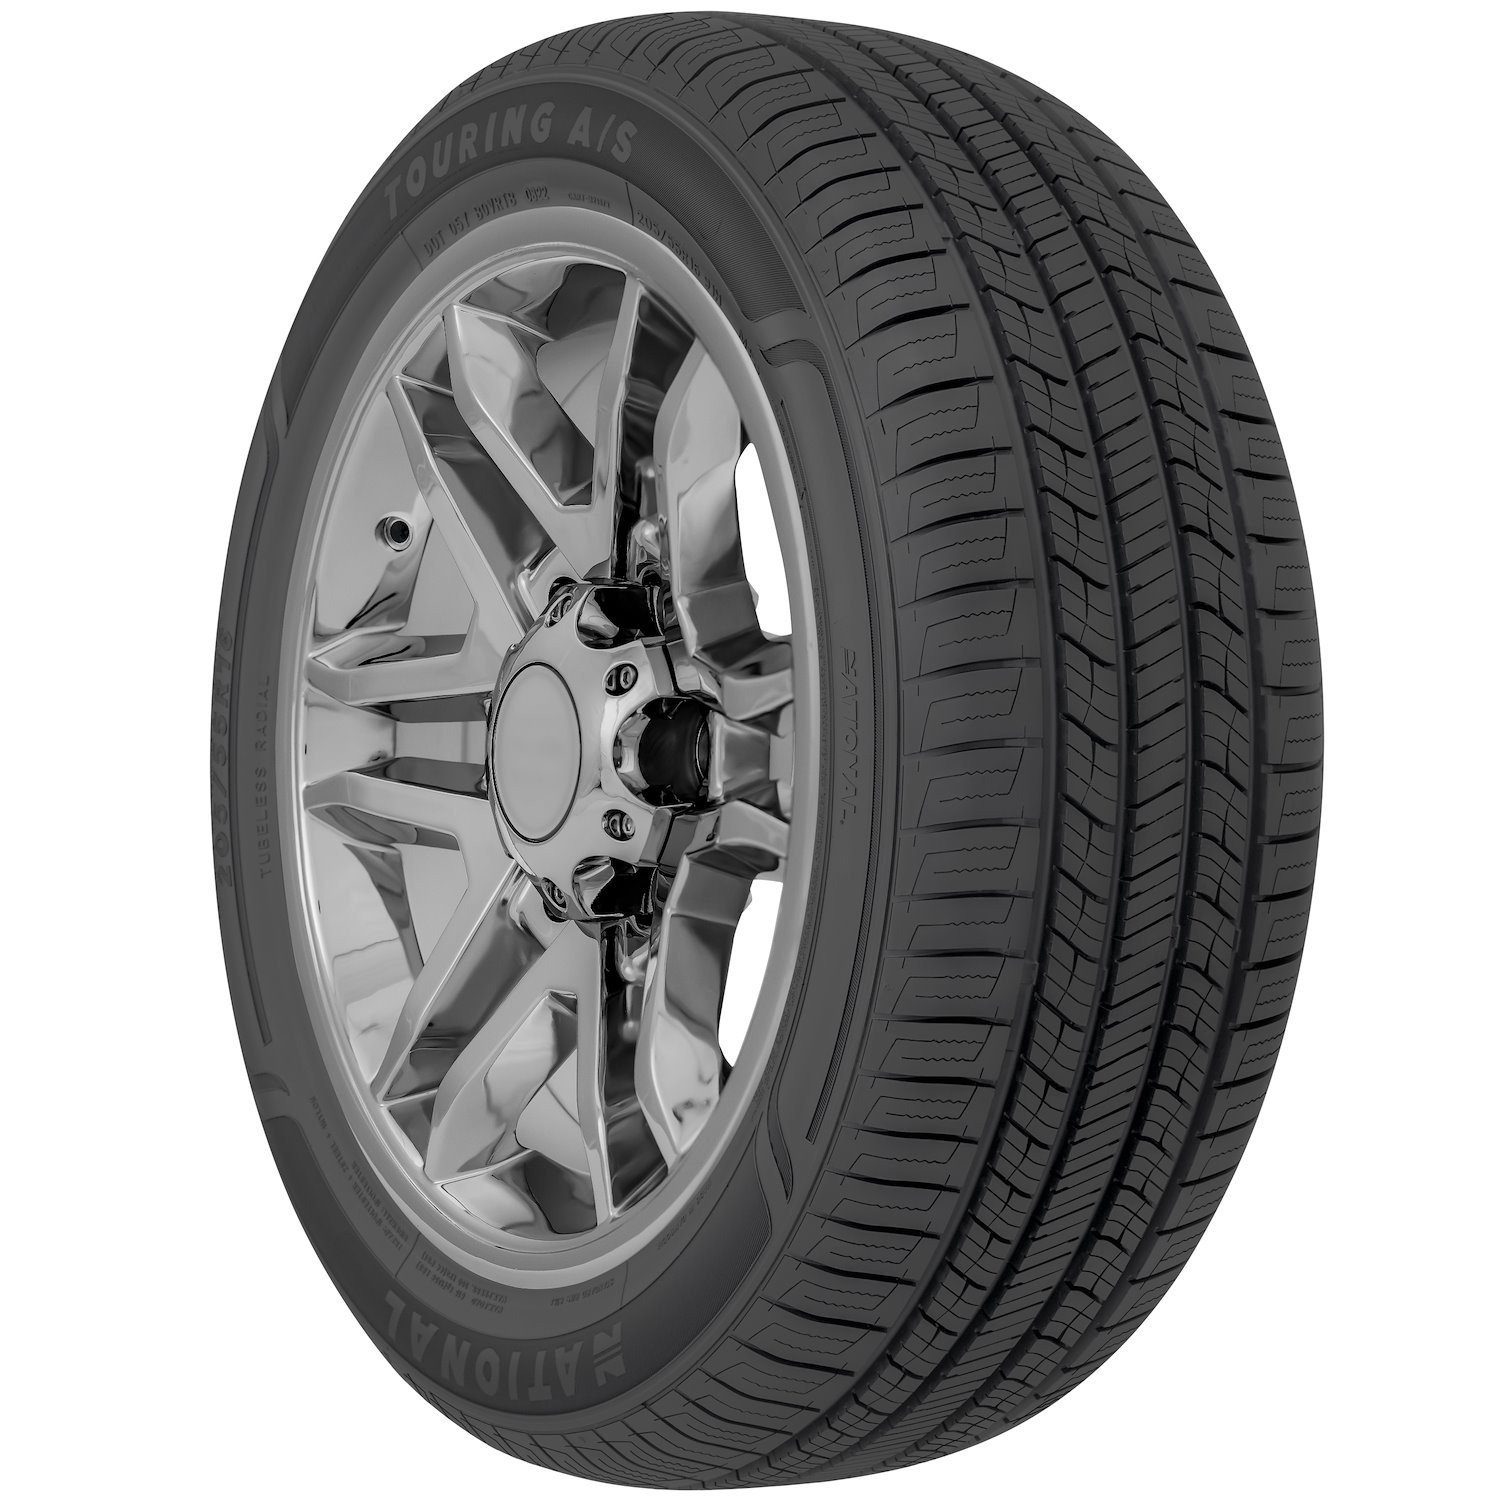 NLR57 Touring A/S Tire, 215/55R16